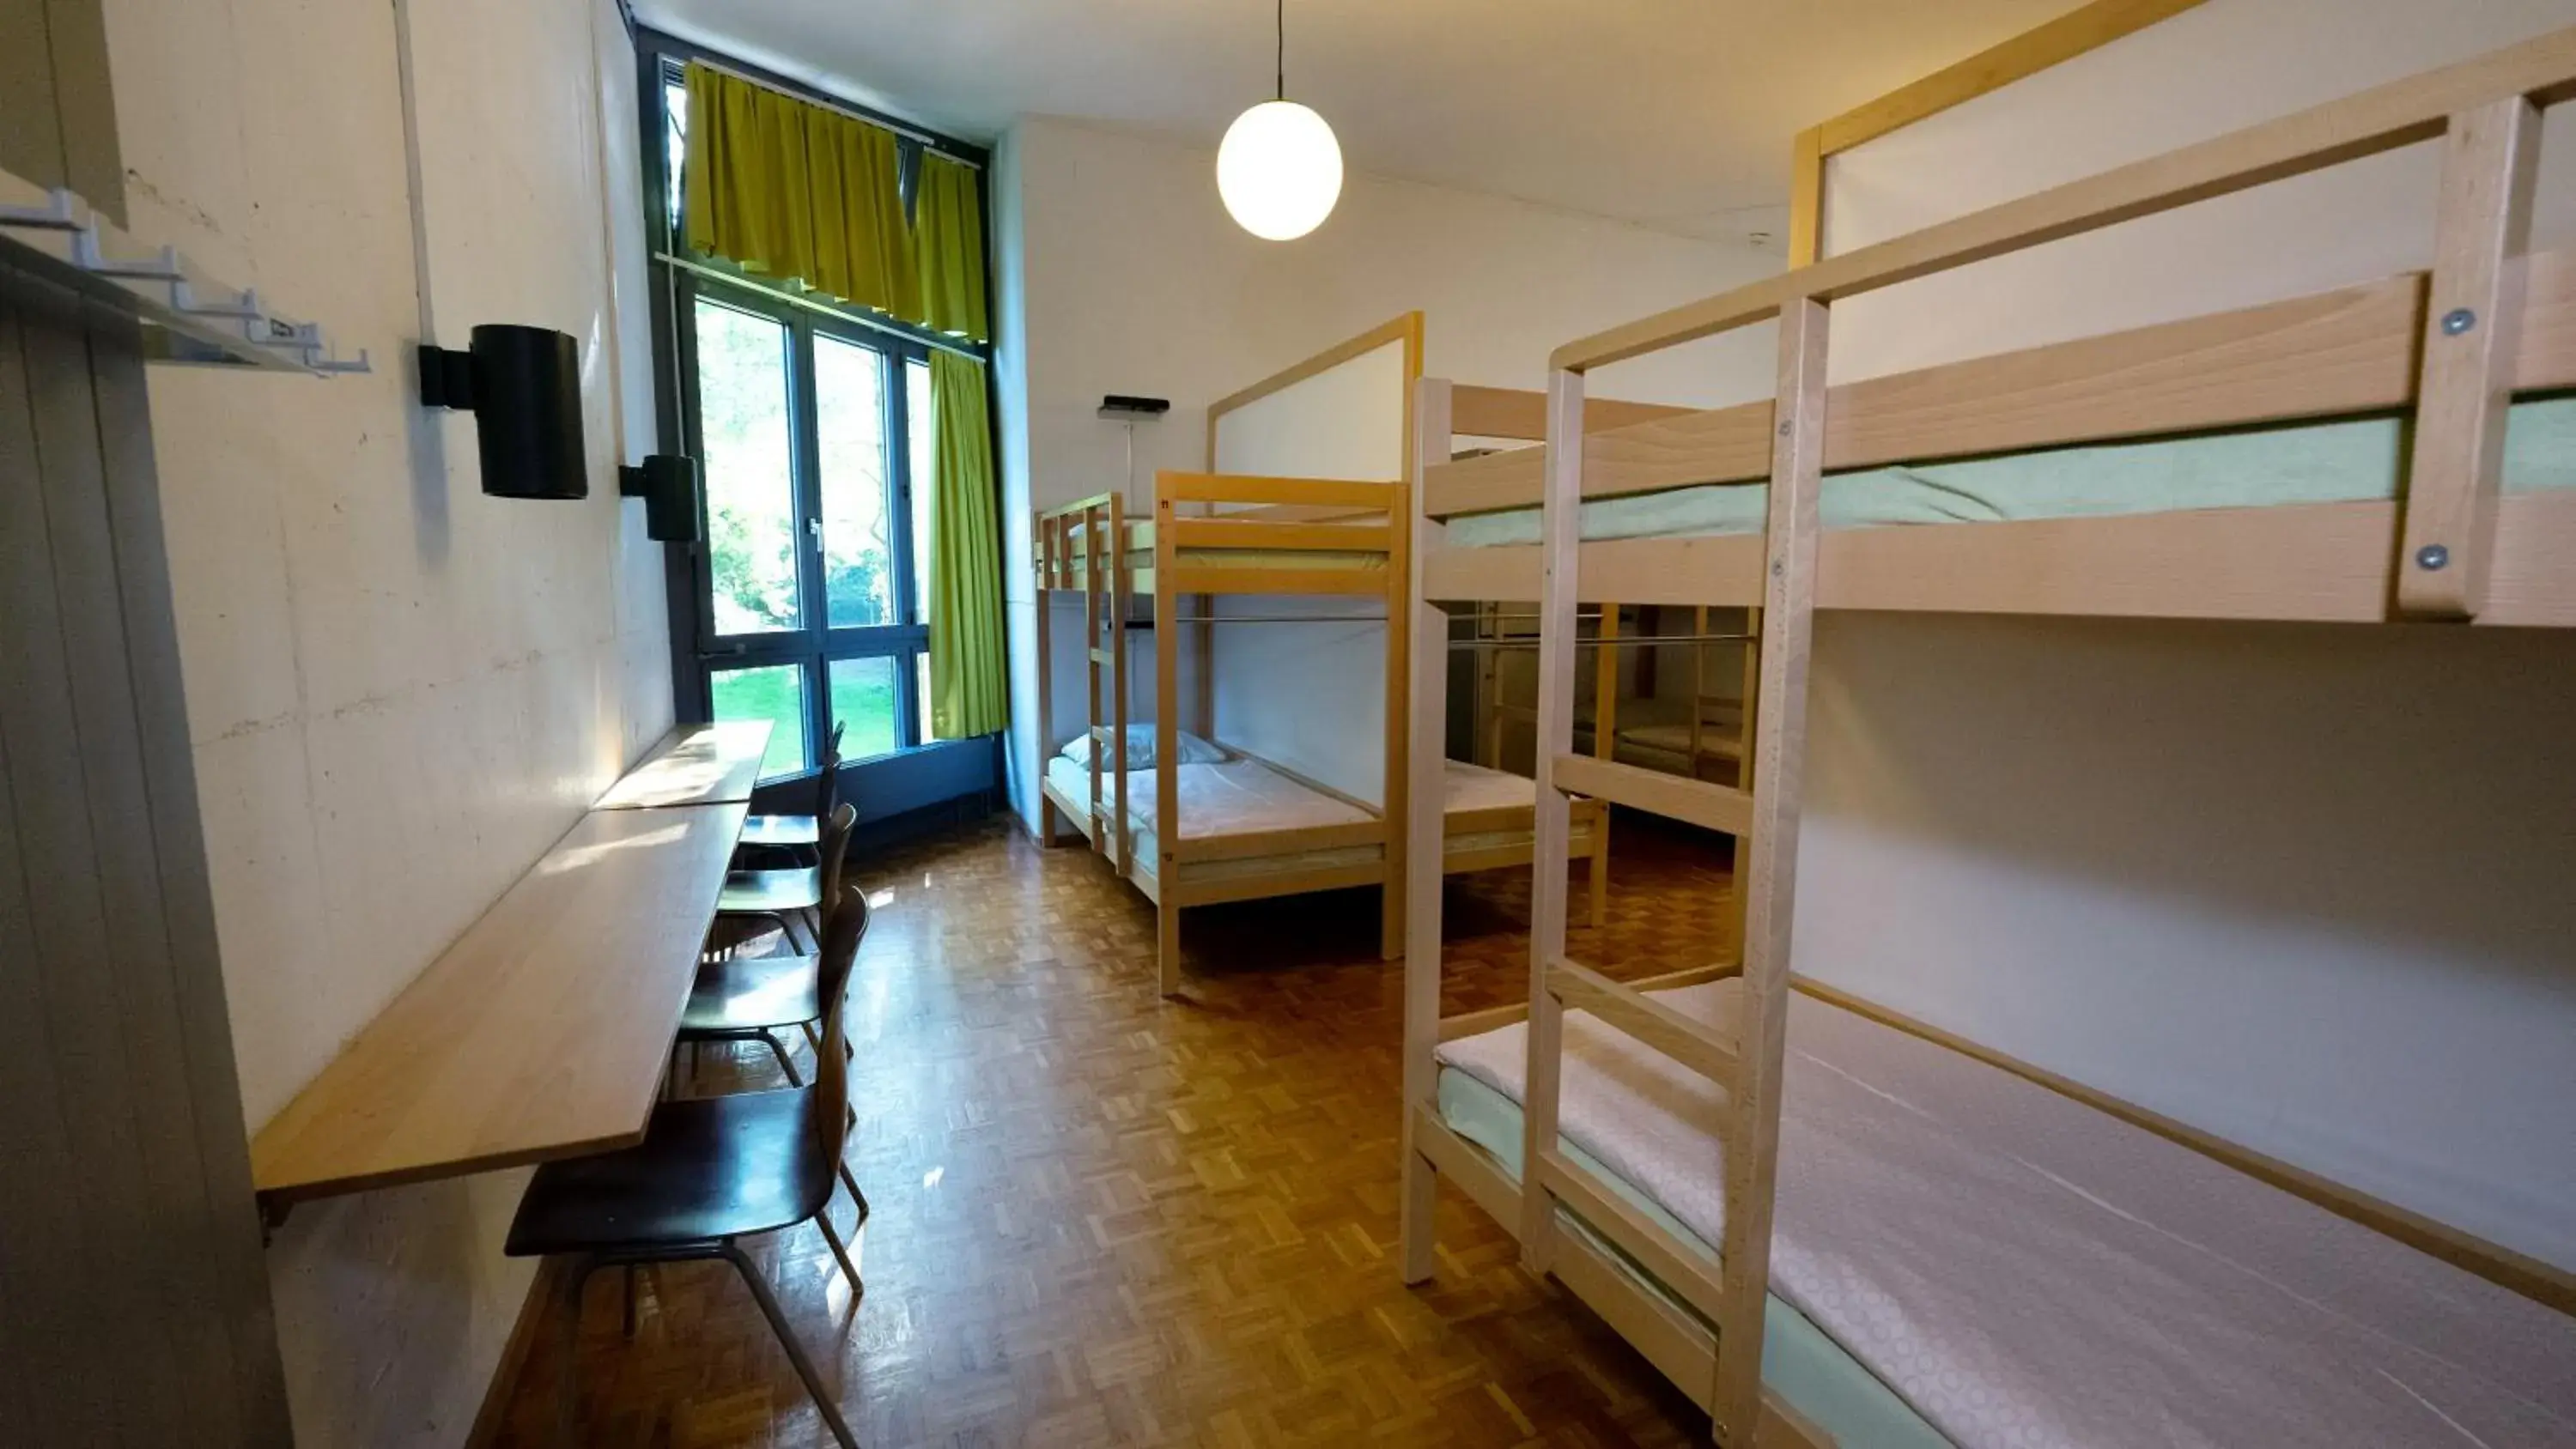 Photo of the whole room, Bunk Bed in Luzern Youth Hostel